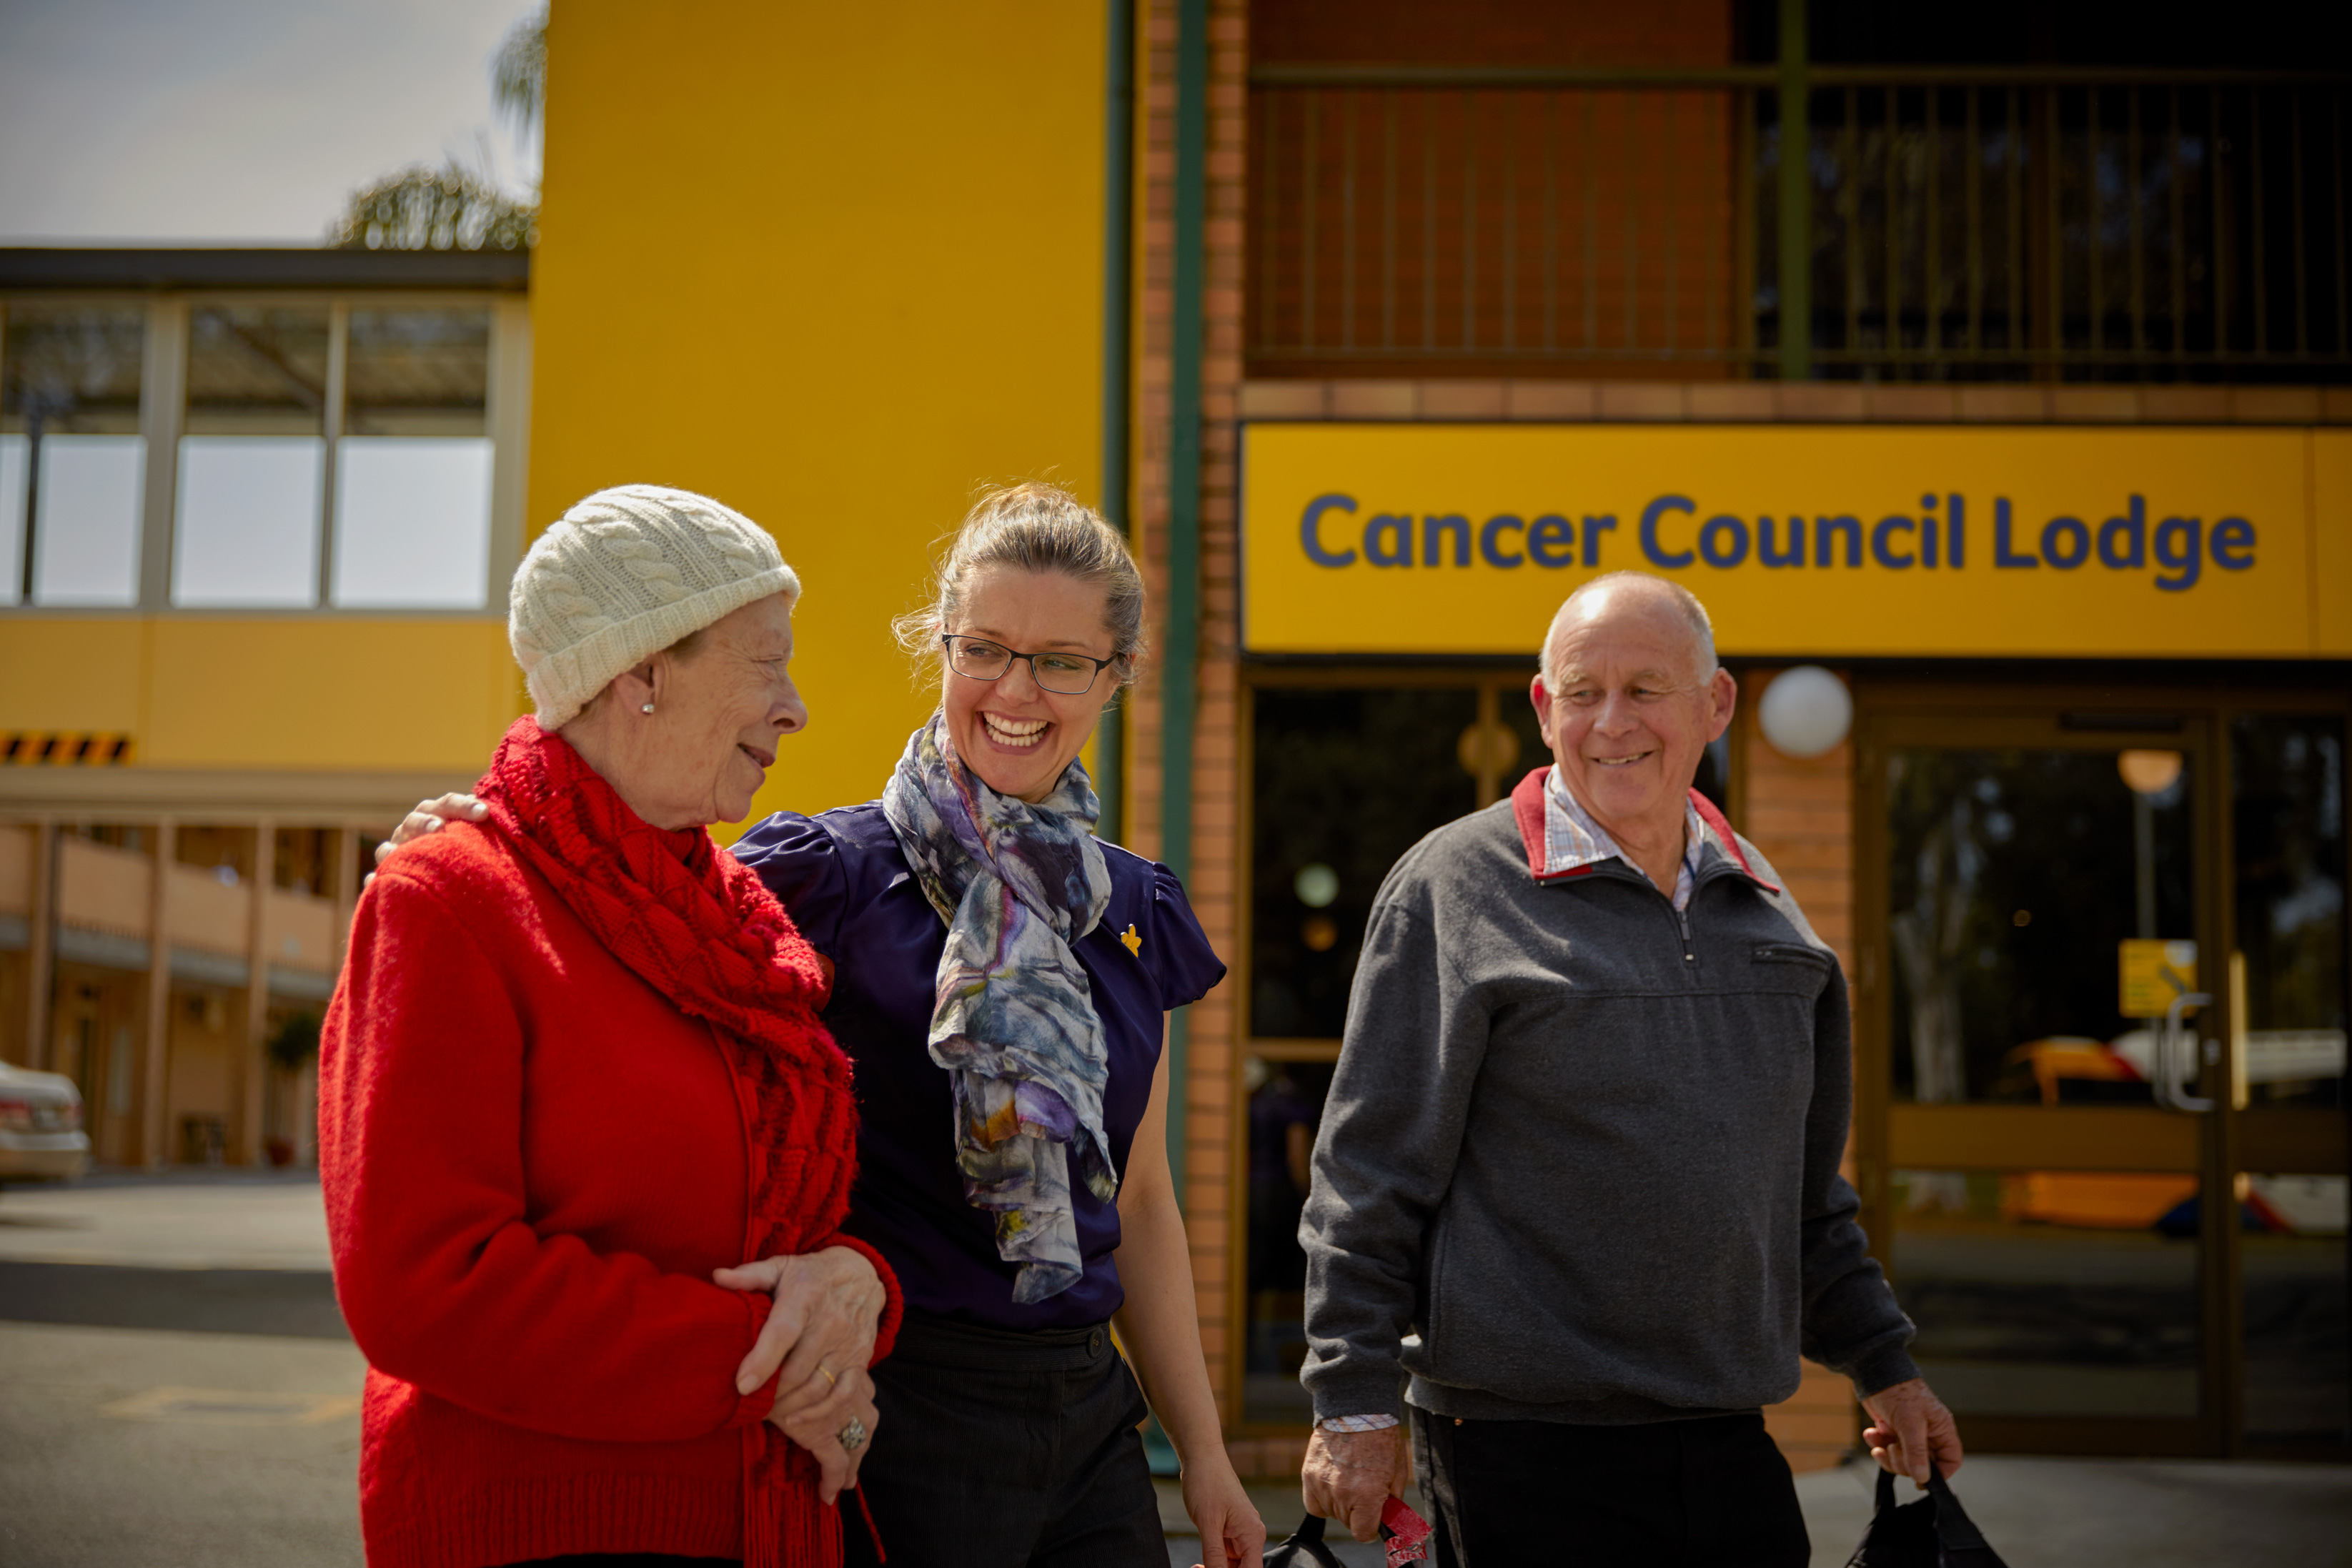 Cancer Council Queensland Lodge